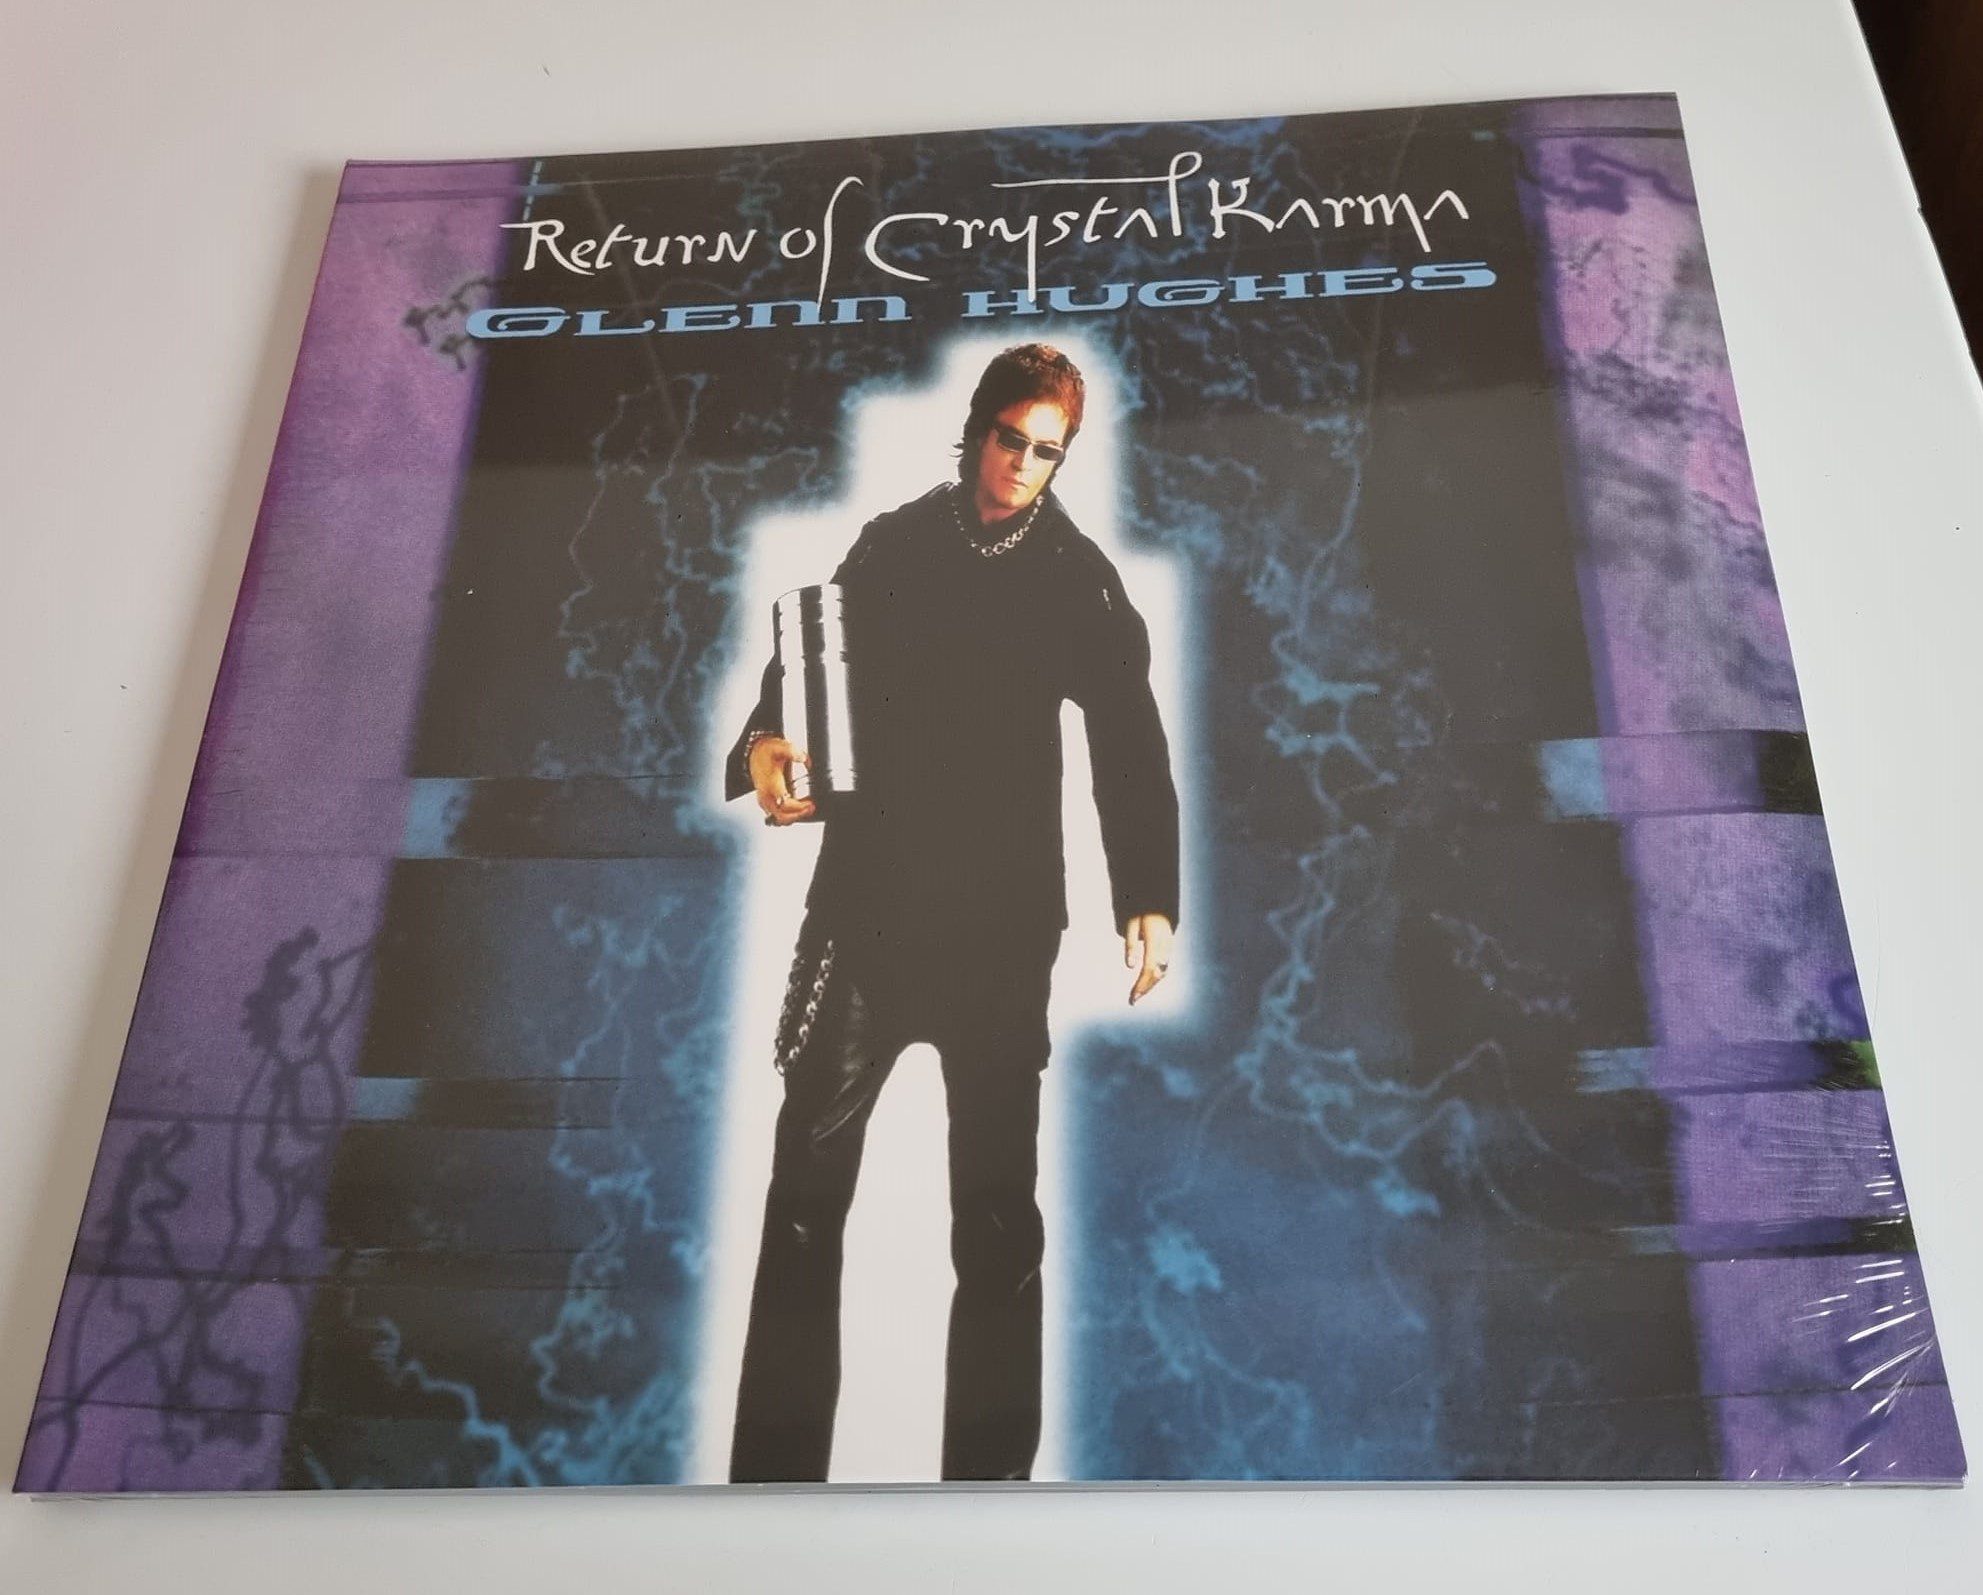 Buy this rare Glenn Hughes record by clicking here